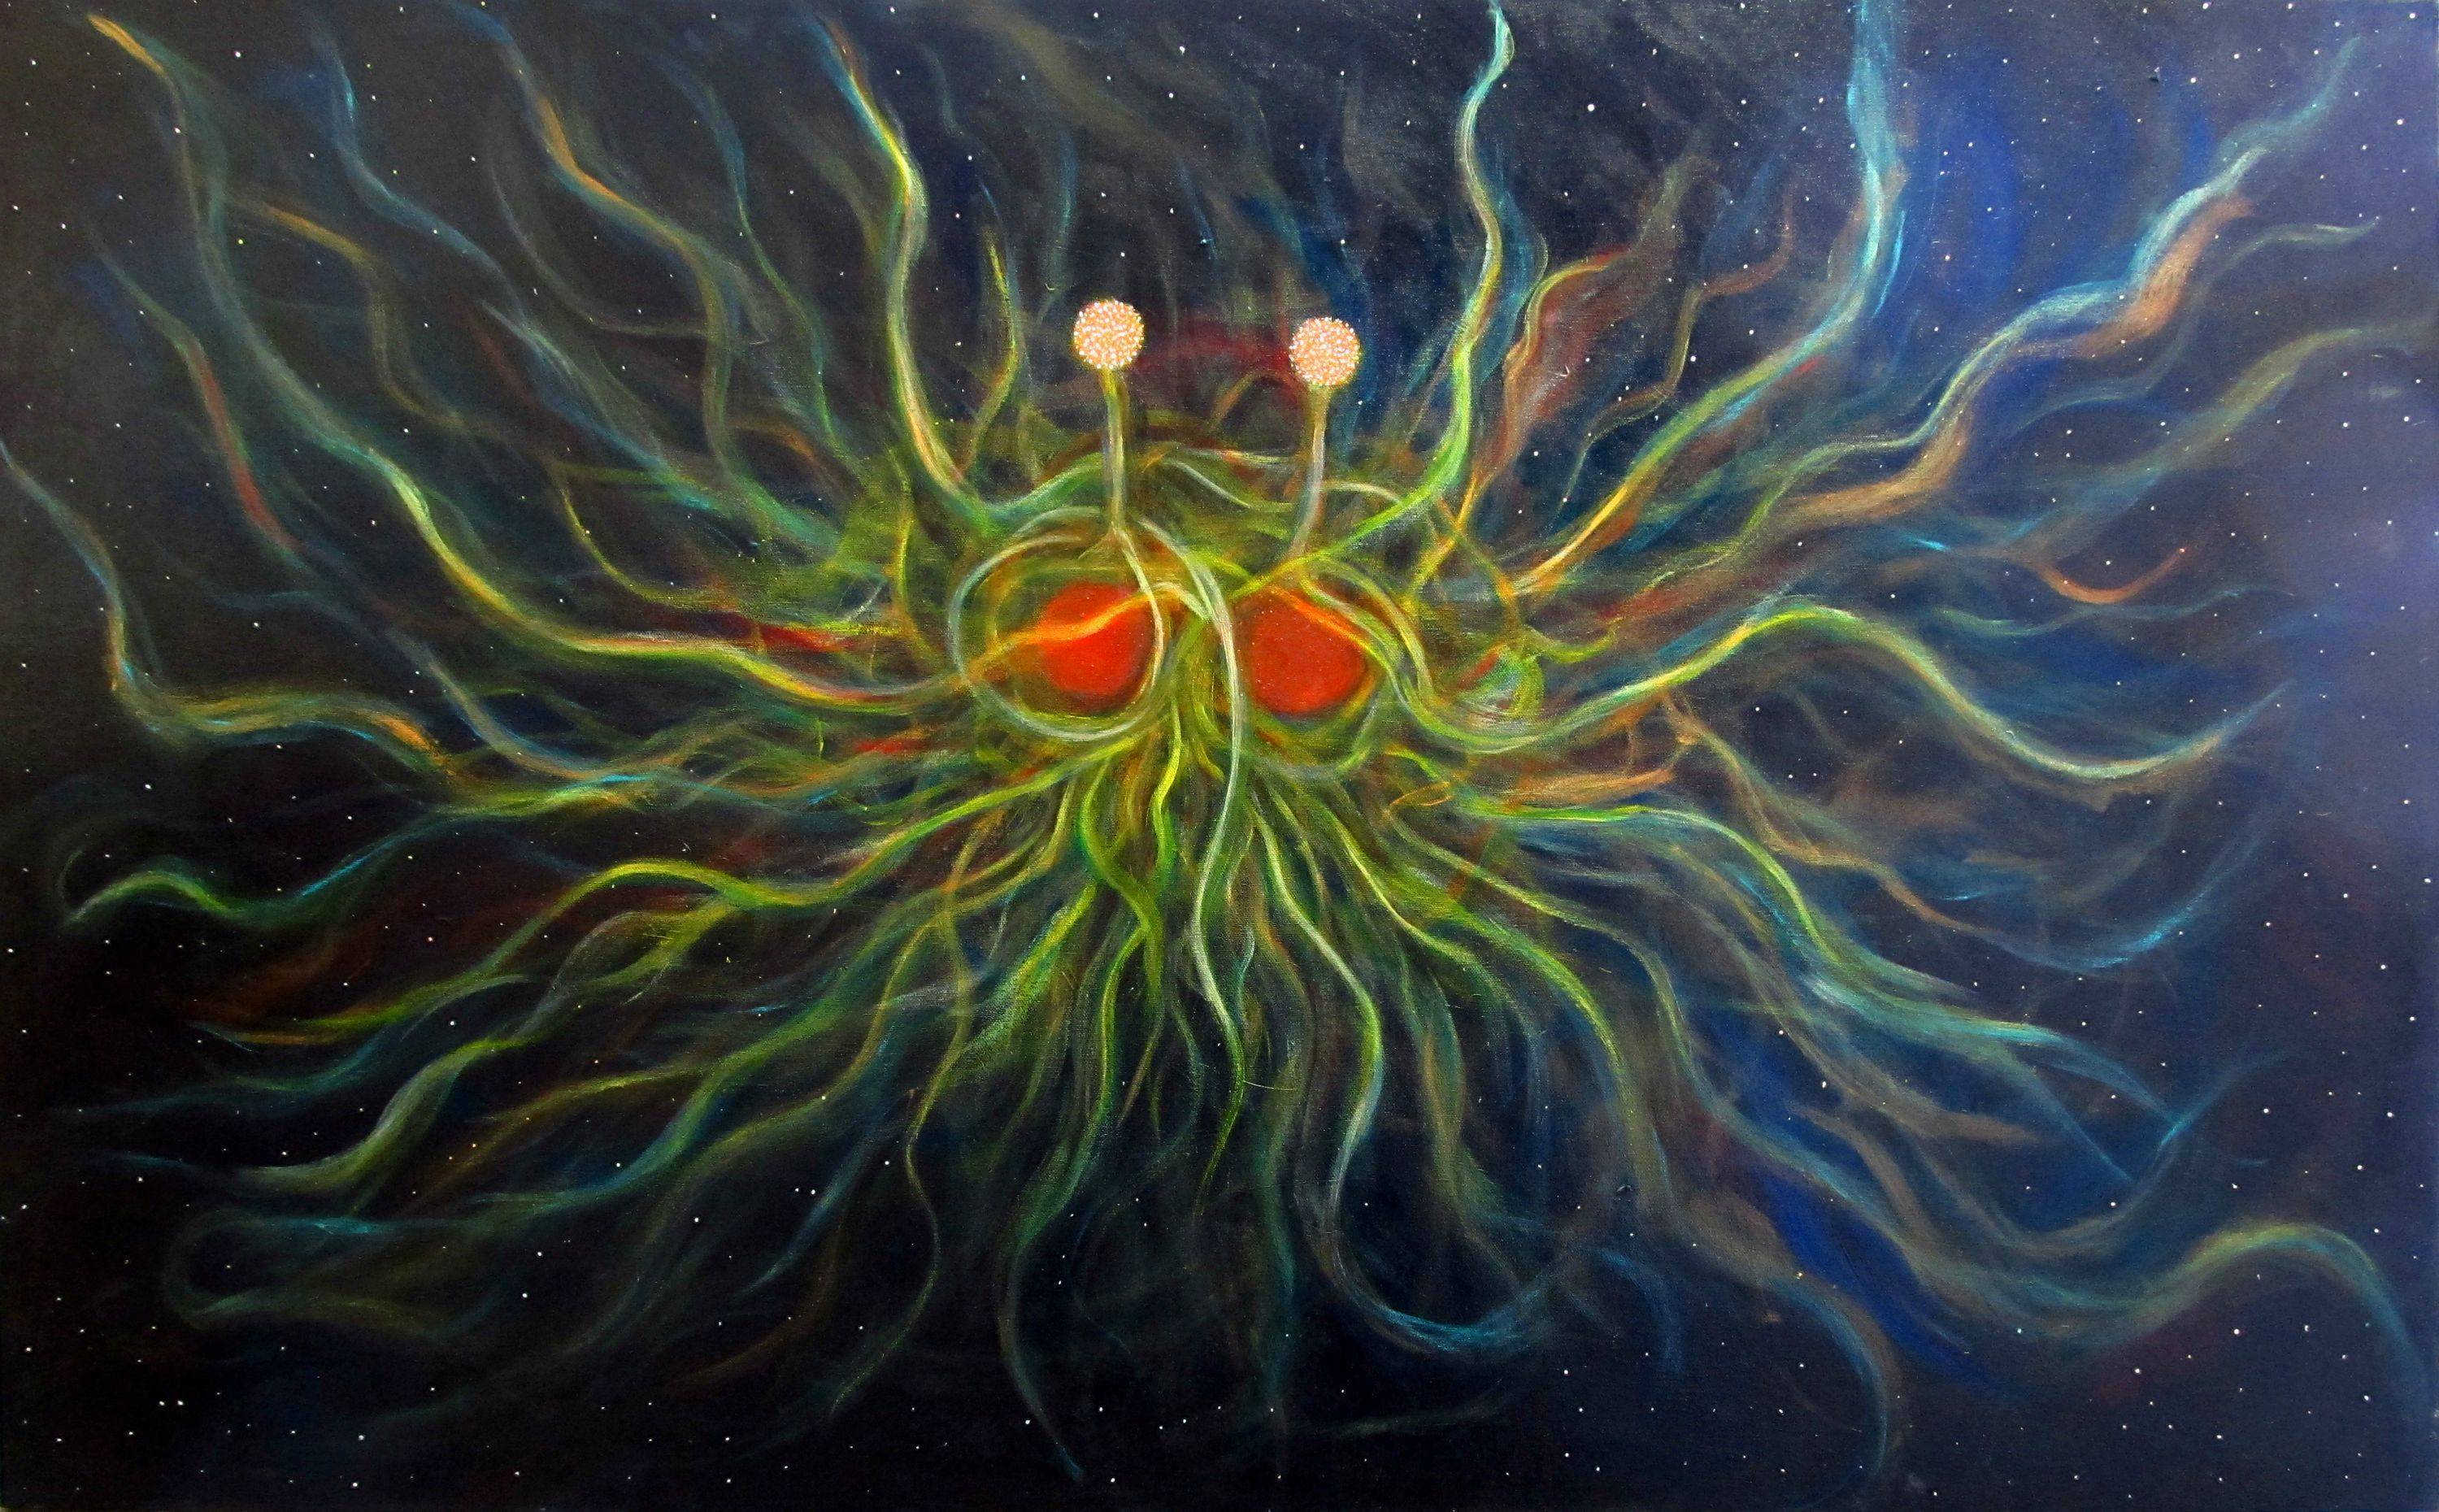 R Art Didn&;t Care About My Flying Spaghetti Monster Painting